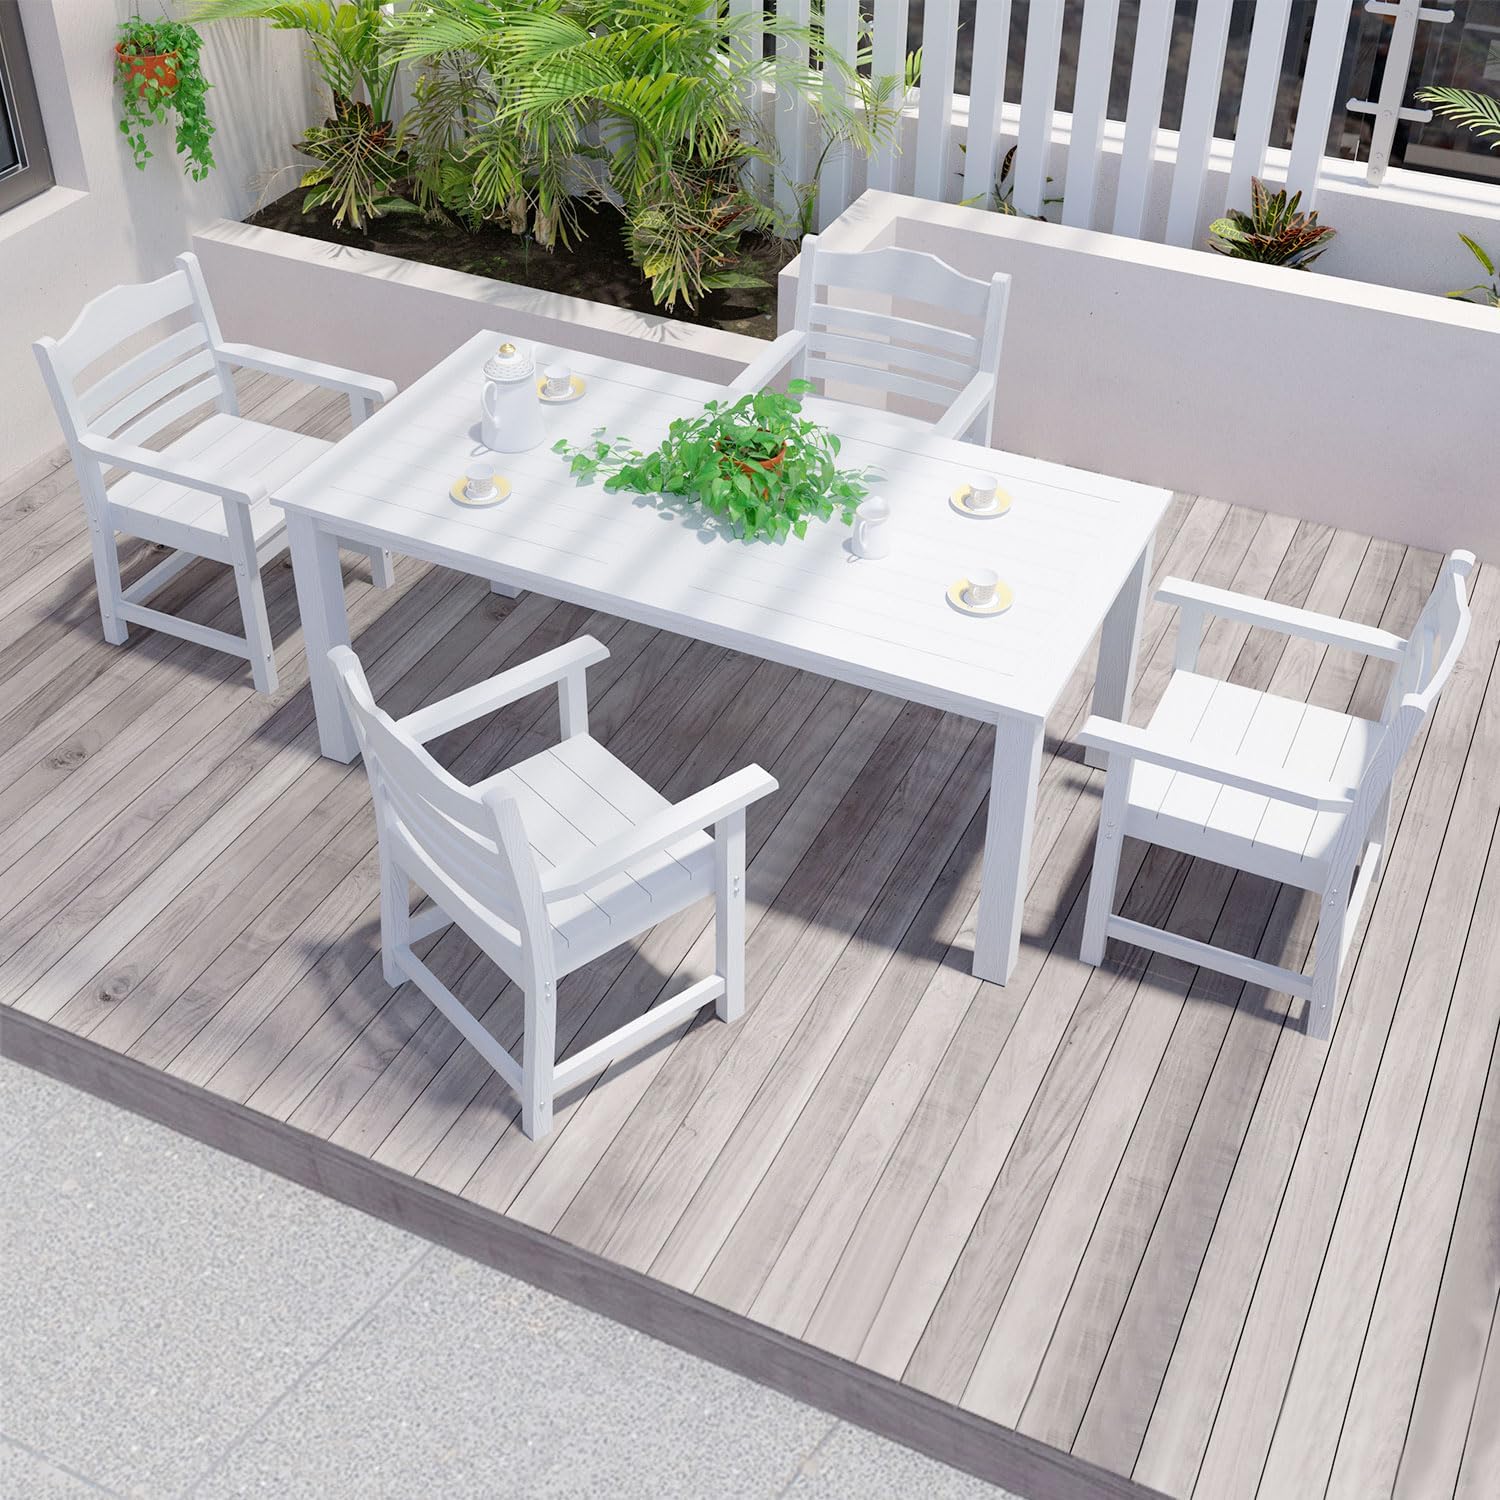 WILLIAMSPACE 5 Piece Patio Dining Set, 70 Rectangular All Weather Dining Table, 4 Dining Chairs with Arms and Back, Outdoor Dining Table Set of 5, Ideal for Outdoors and Indoors (White)